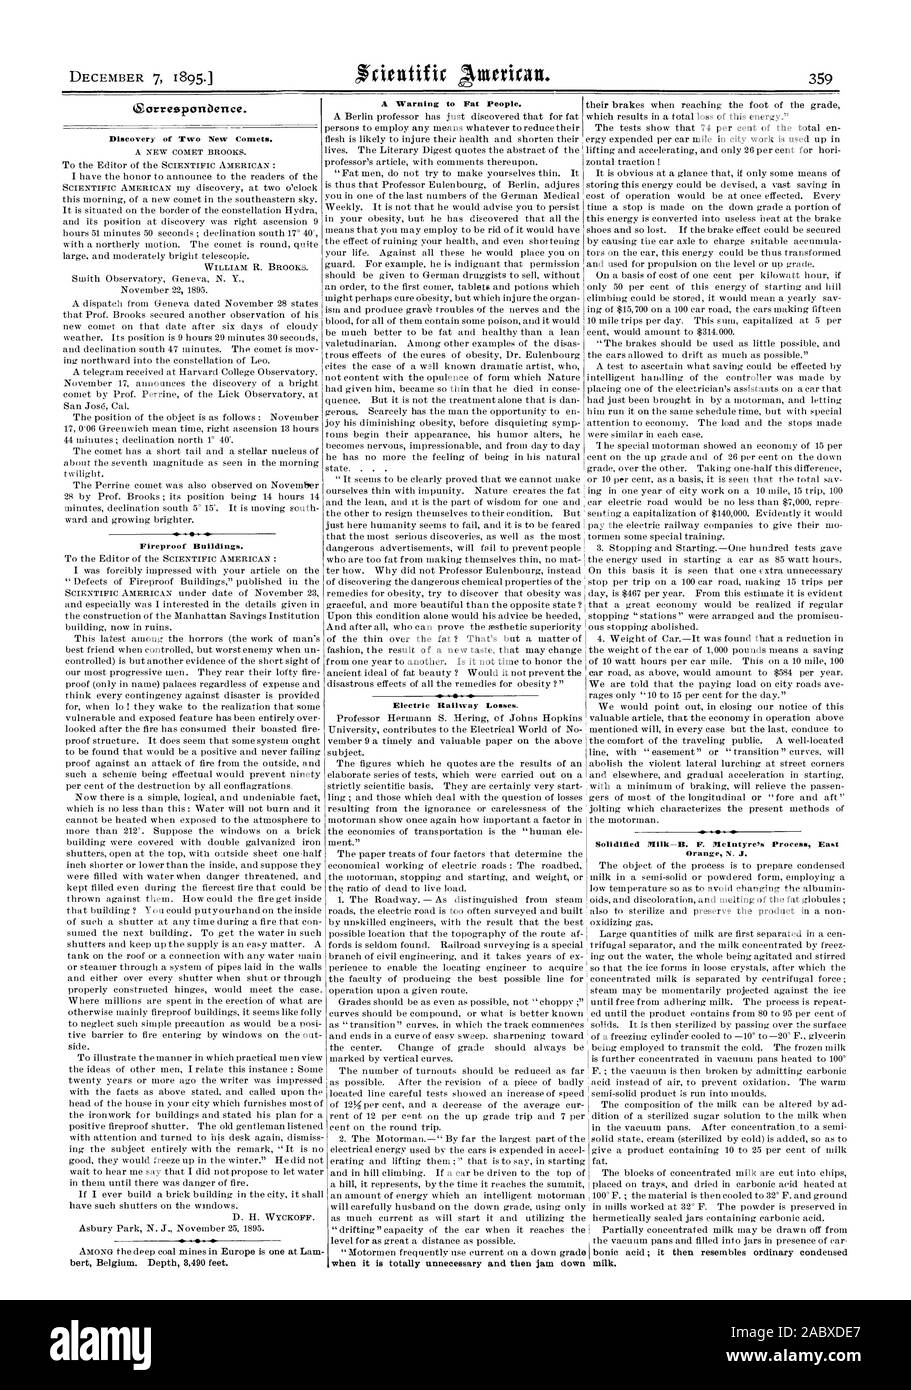 Sorresponbence. Discovery of Two New Cornets. Fireproof Buildings. D. H. WYCKOFF. bert Belgium. Depth 8490 feet. A Warning to Fat People. Solidified Milk—B F. McIntyre's Process East Orange N. J. milk. Electric Railway Losses. when it is totally unnecessary and then jam down, scientific american, 1895-12-07 Stock Photo